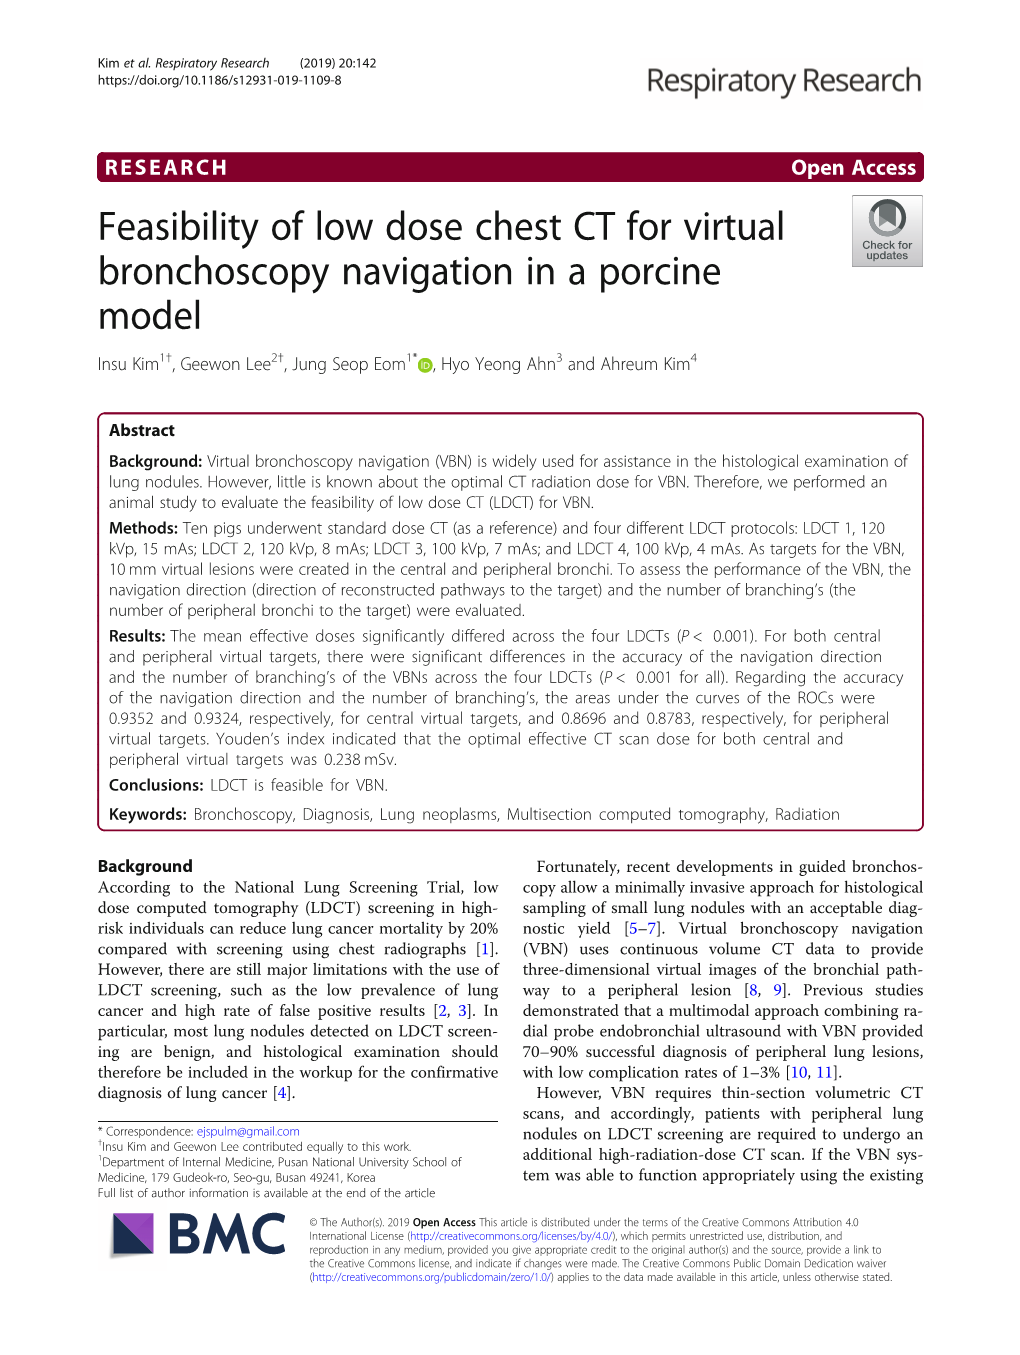 Feasibility of Low Dose Chest CT for Virtual Bronchoscopy Navigation in a Porcine Model Insu Kim1†, Geewon Lee2†, Jung Seop Eom1* , Hyo Yeong Ahn3 and Ahreum Kim4